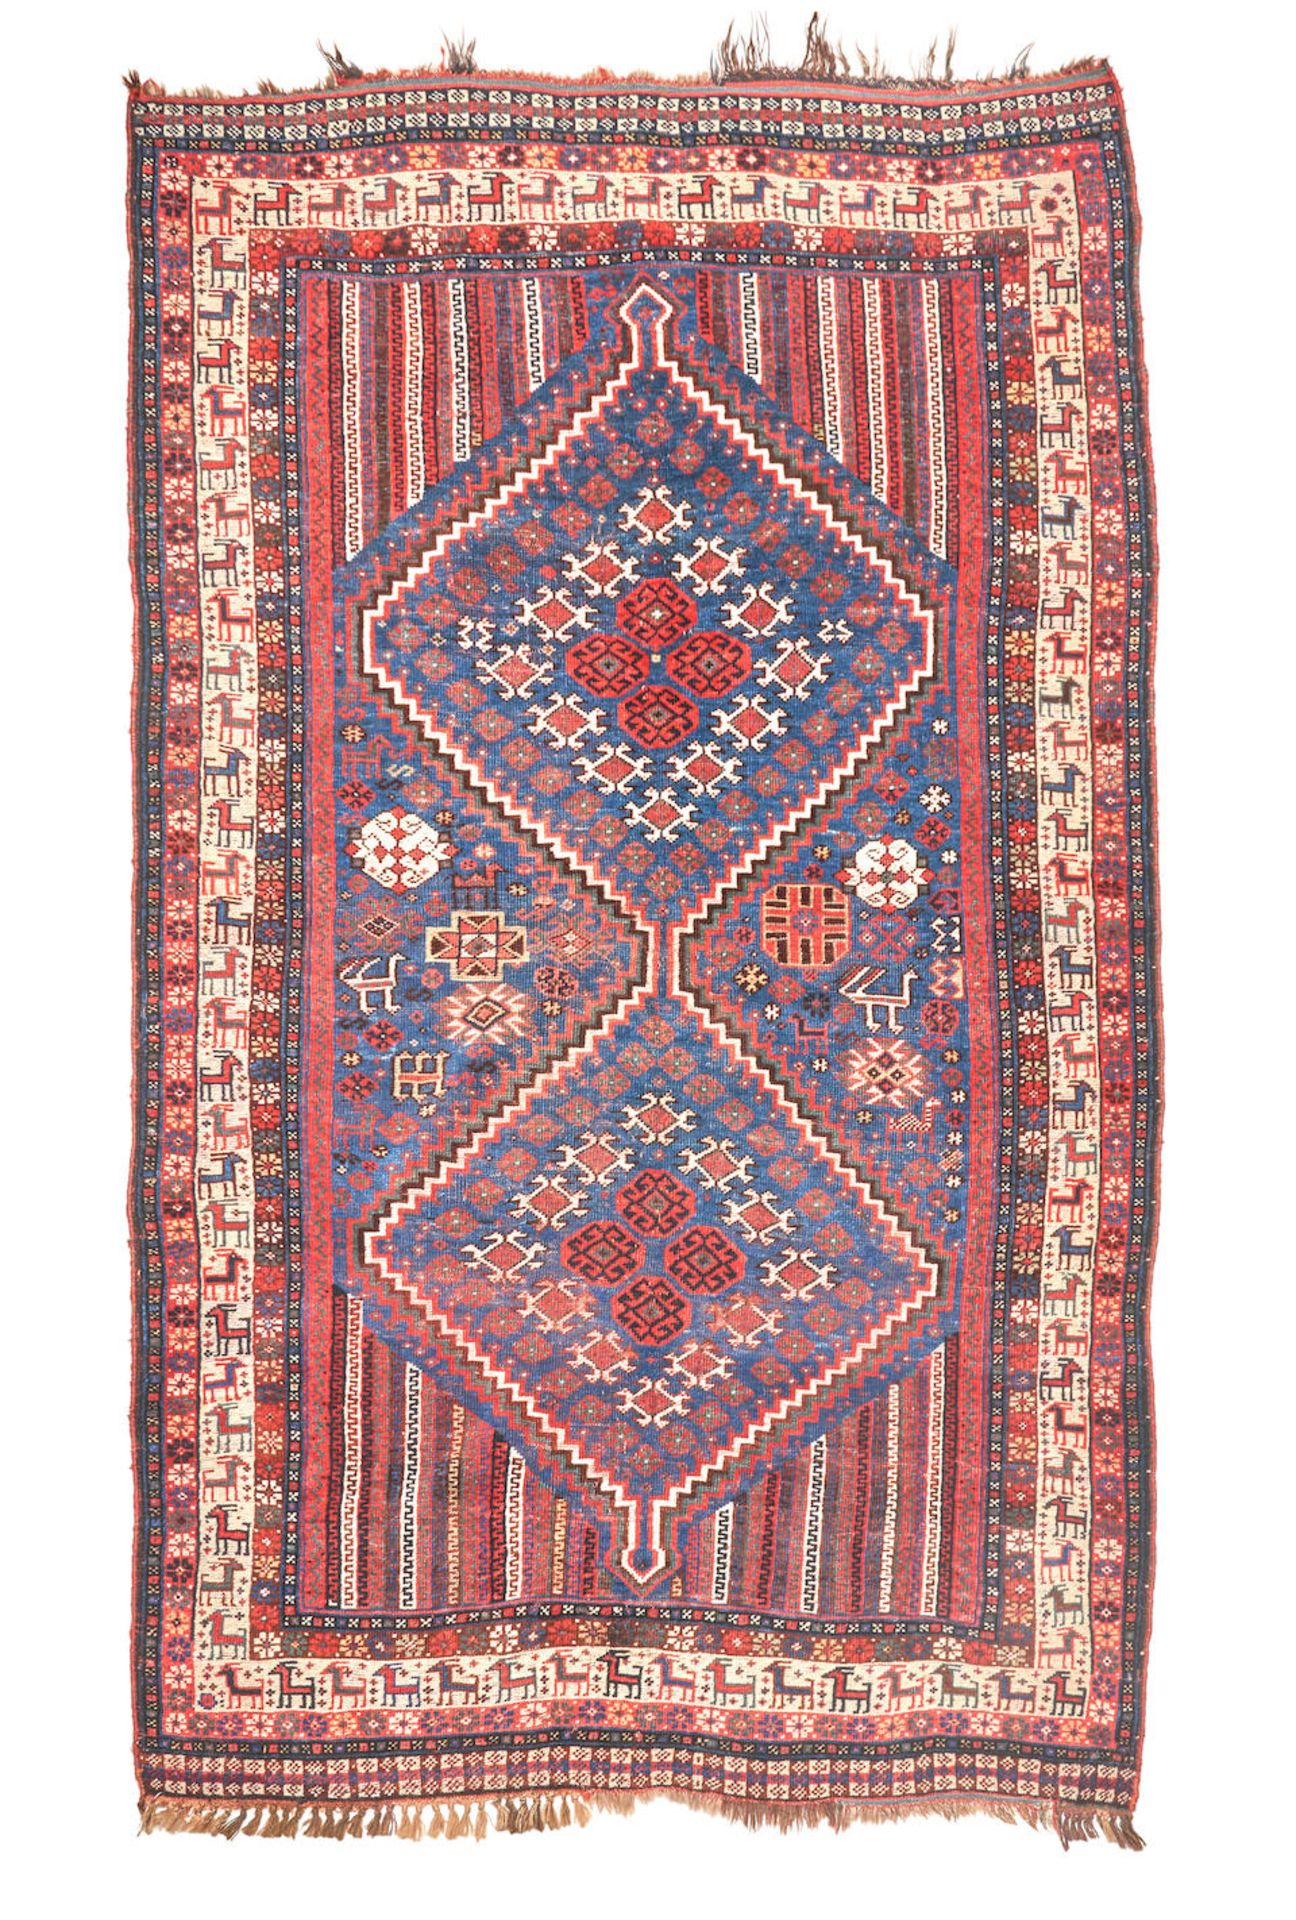 Southwest Persian Rug Iran 3 ft. 11 in. x 6 ft. 5 in.